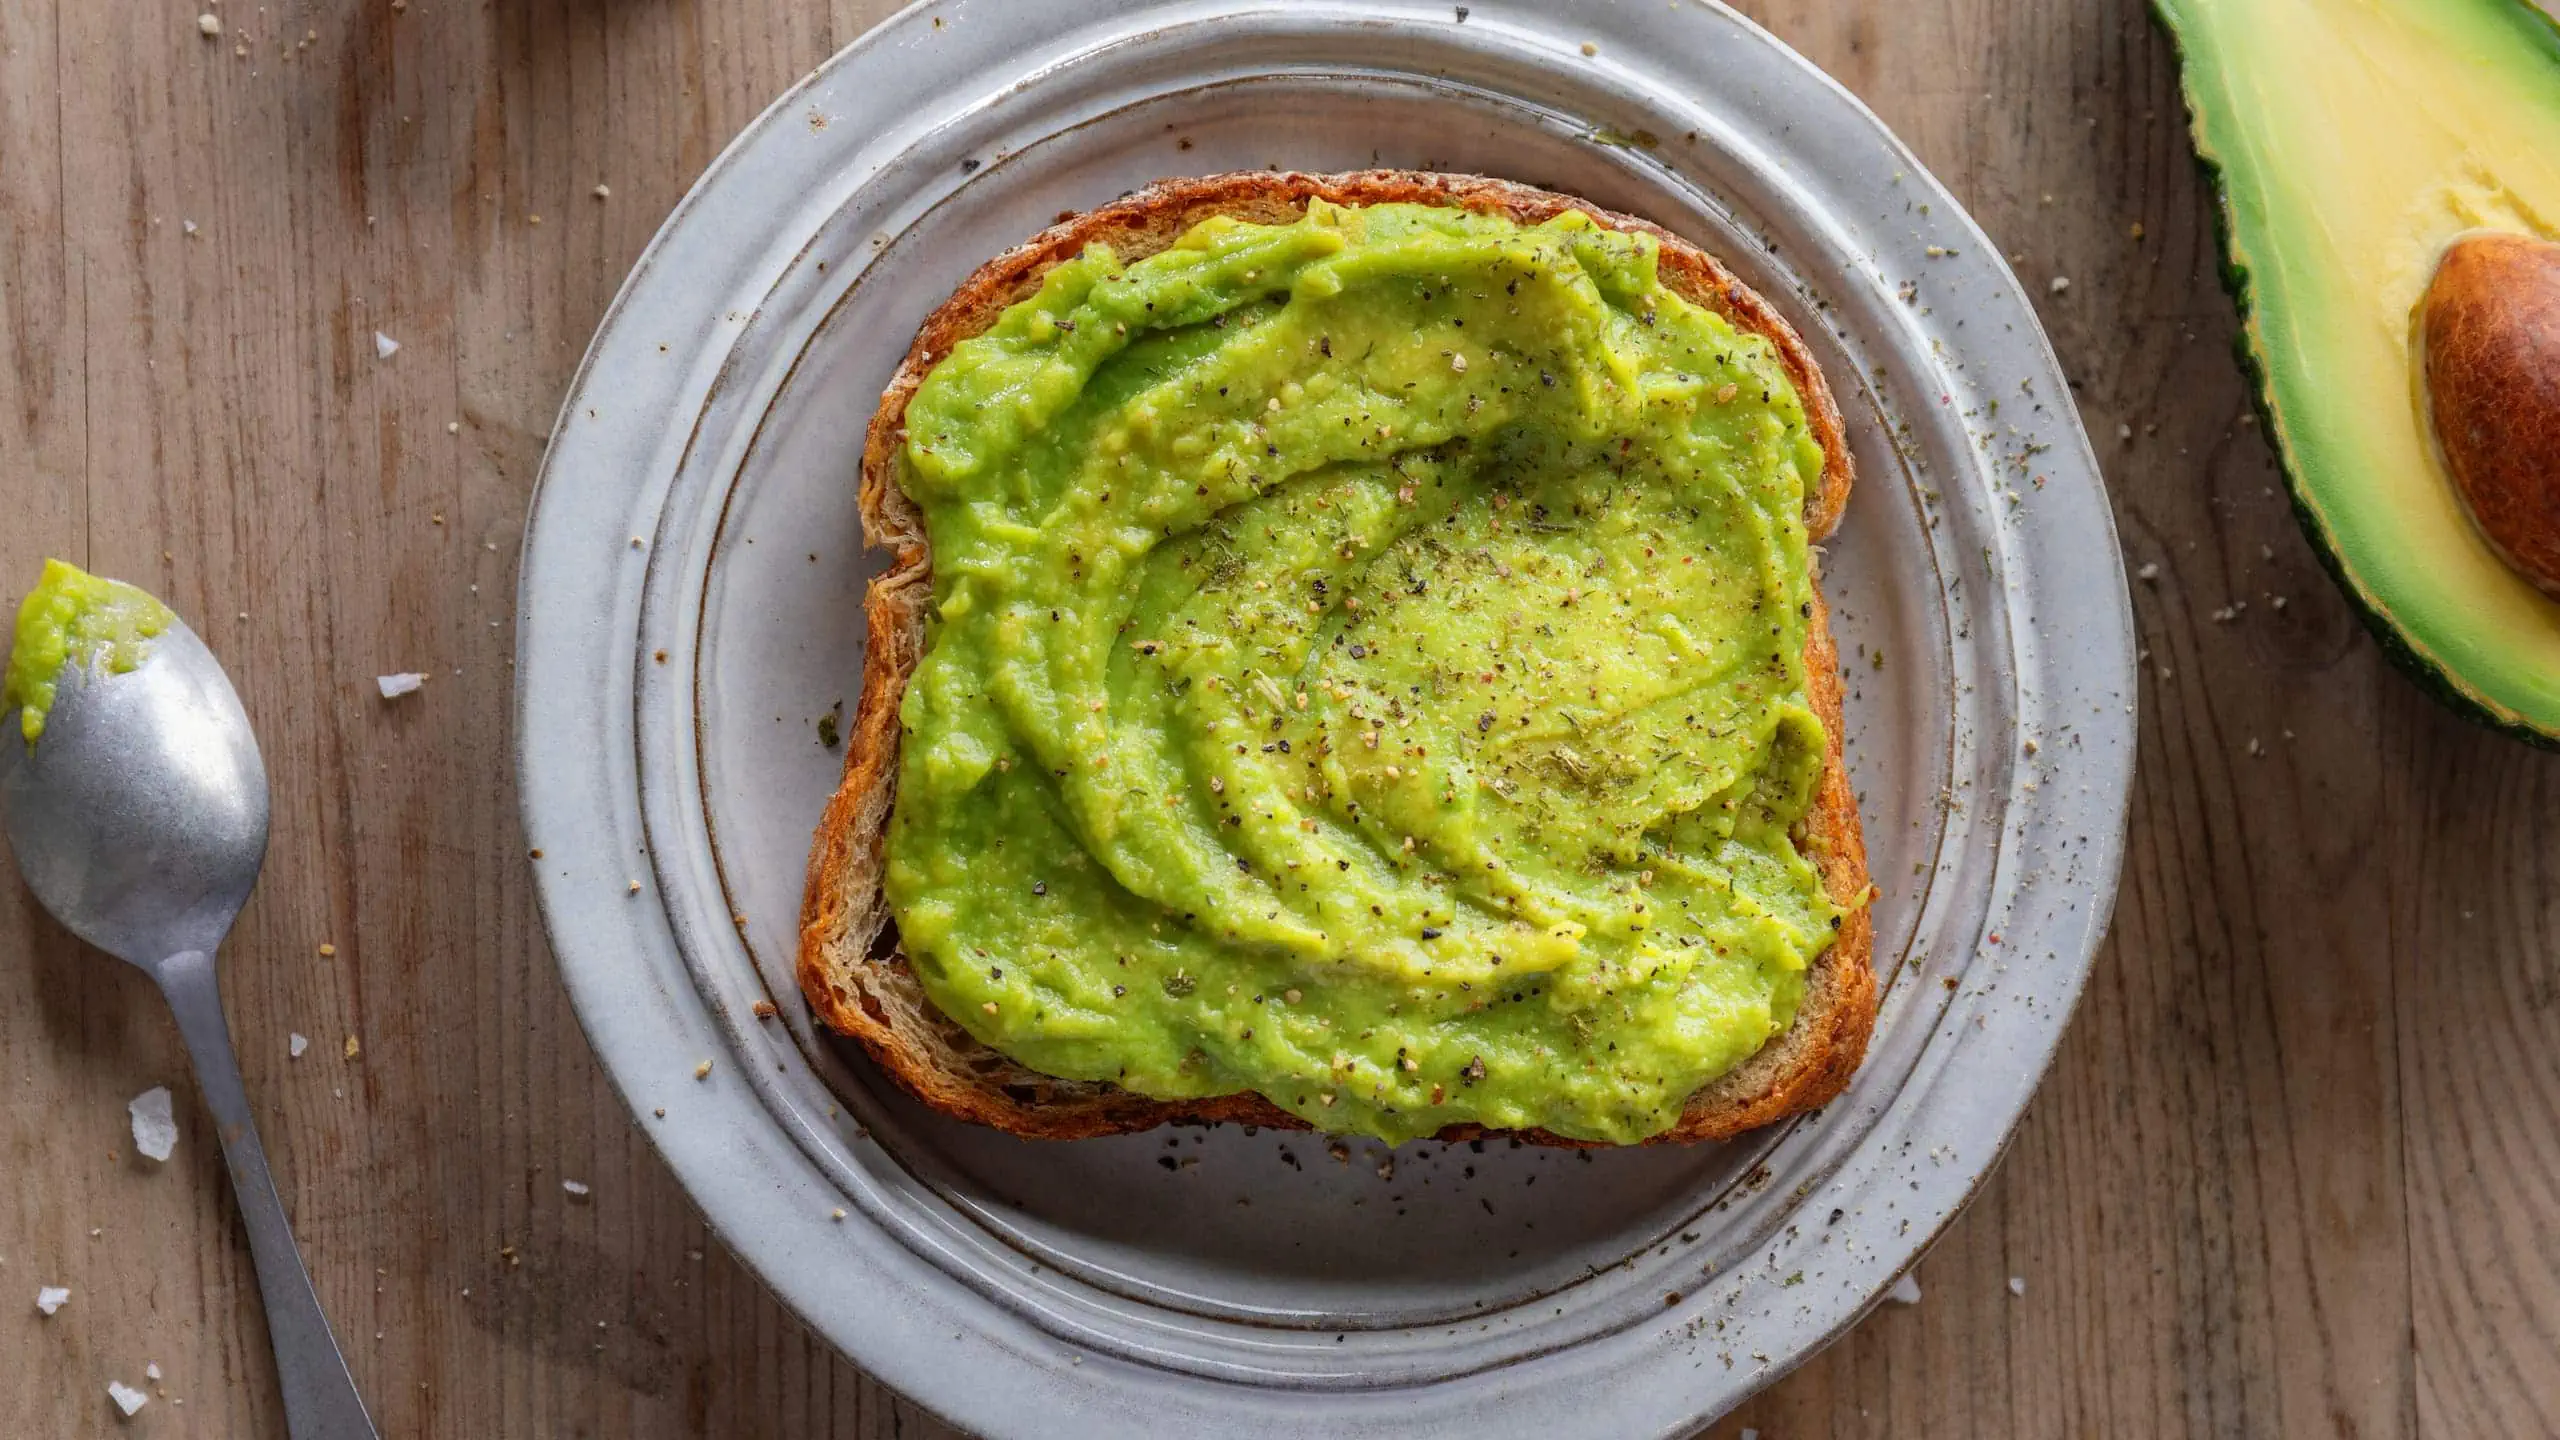 Our version of Dunkin Donuts’ avocado toast recipe